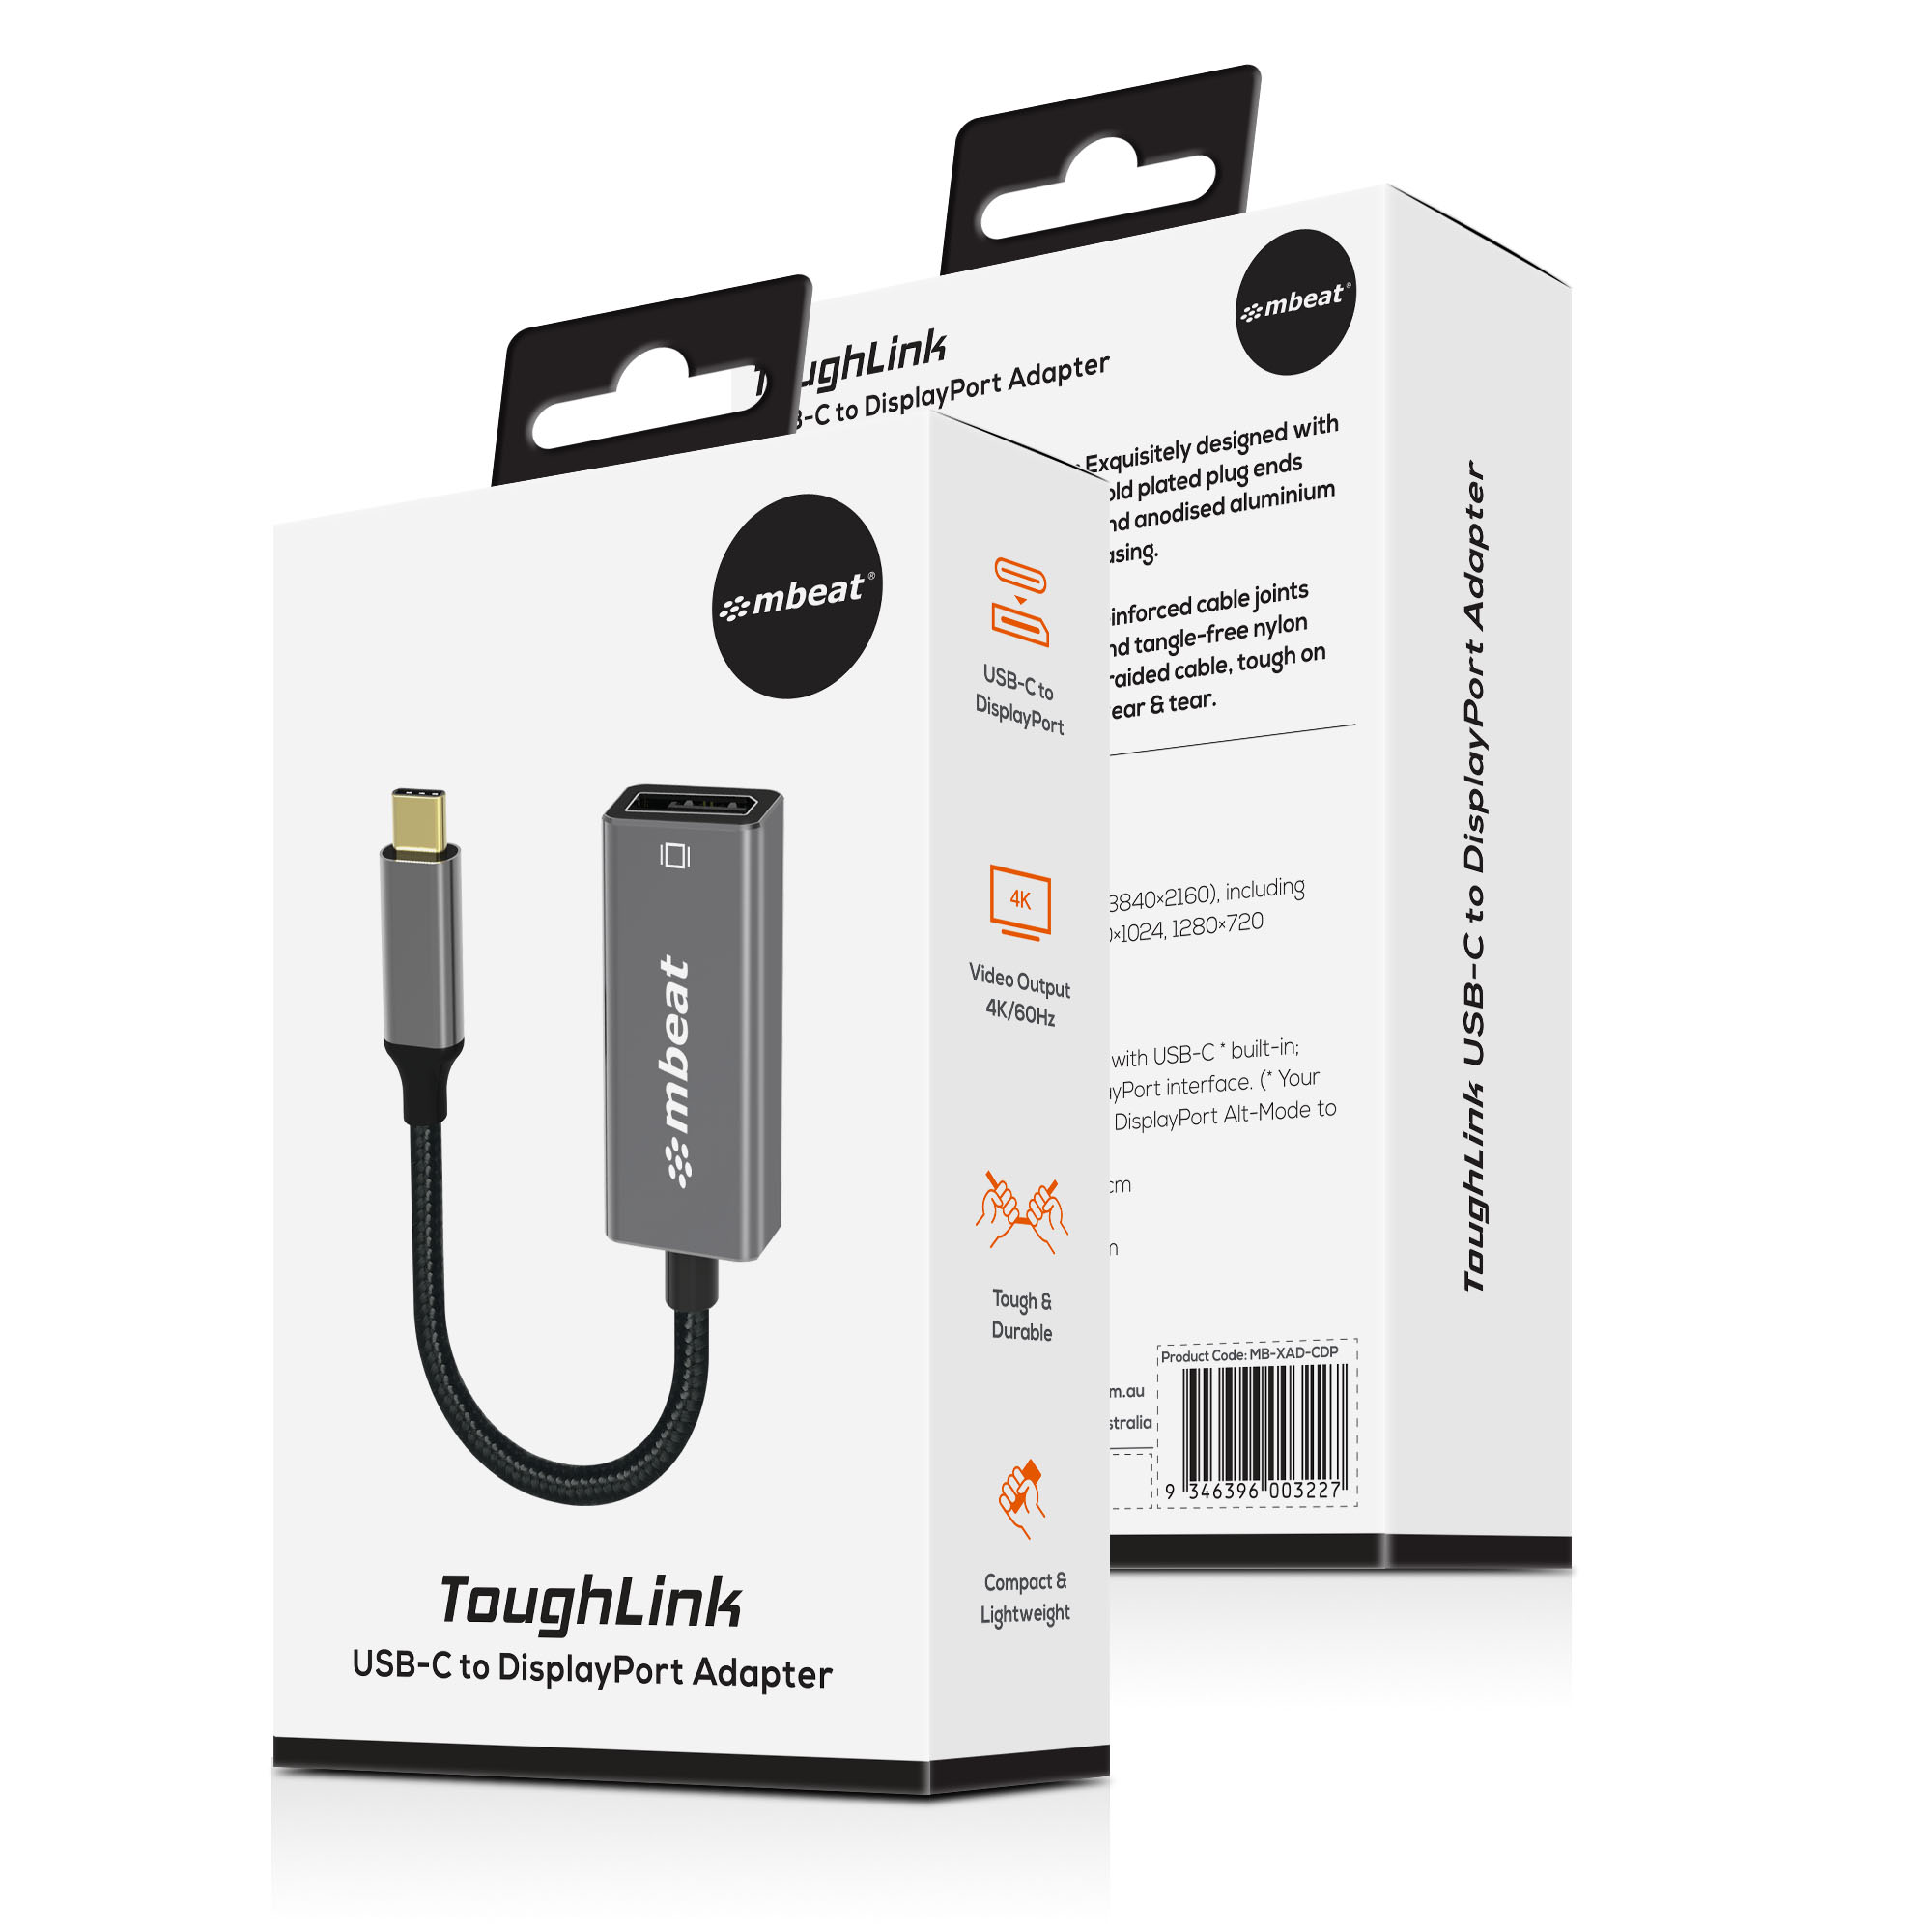 A large marketing image providing additional information about the product mBeat ToughLink USB-C to DP adapter - Additional alt info not provided